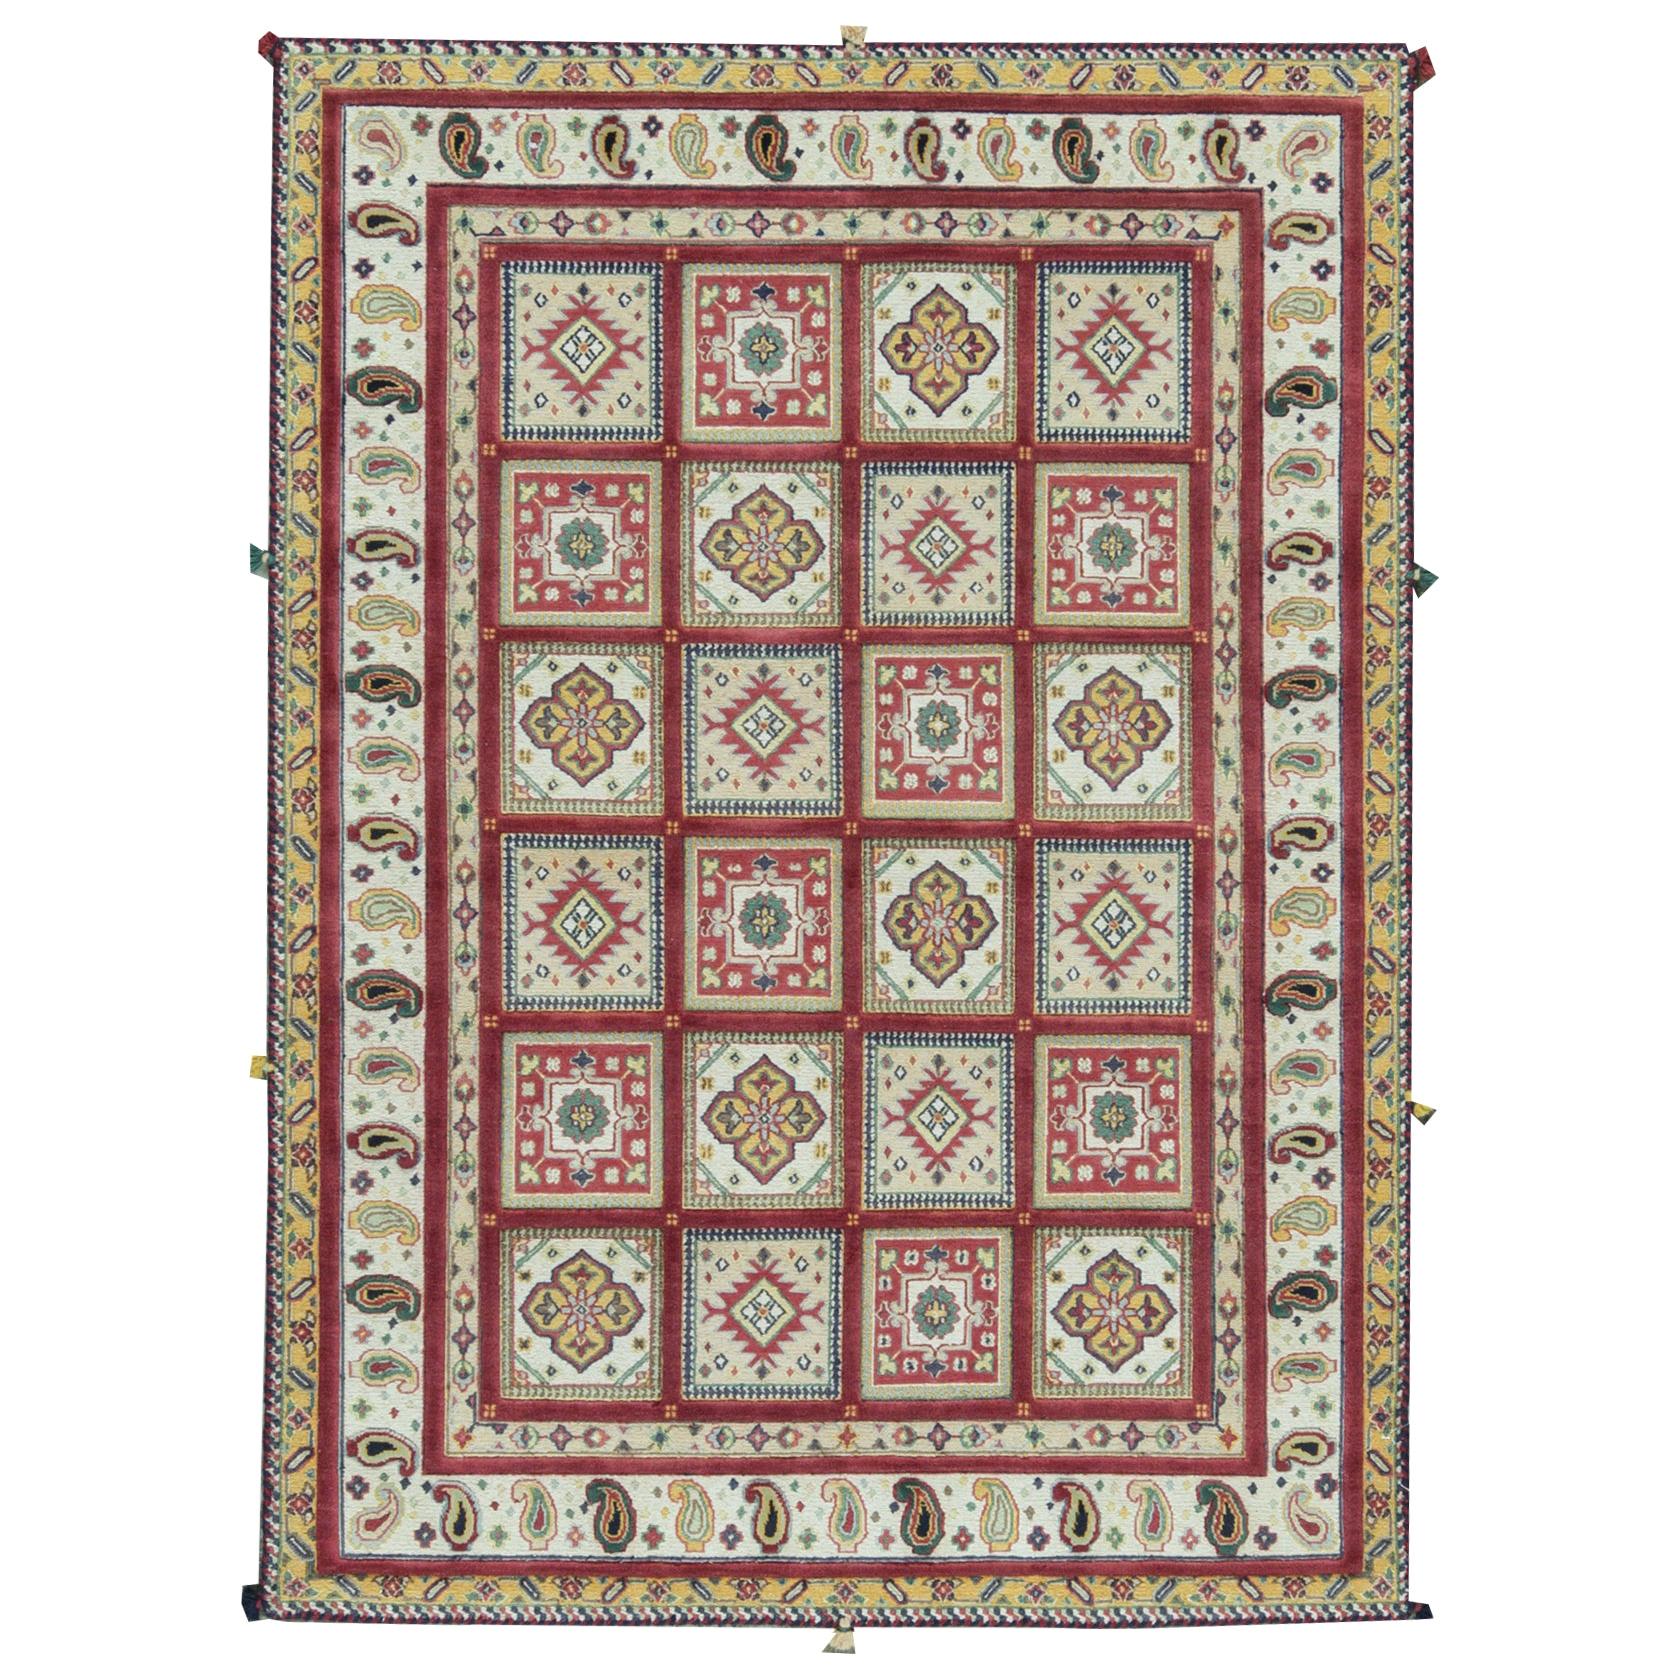 One of a Kind Traditional Handwoven Wool Area Rug  4'4 x 6'1